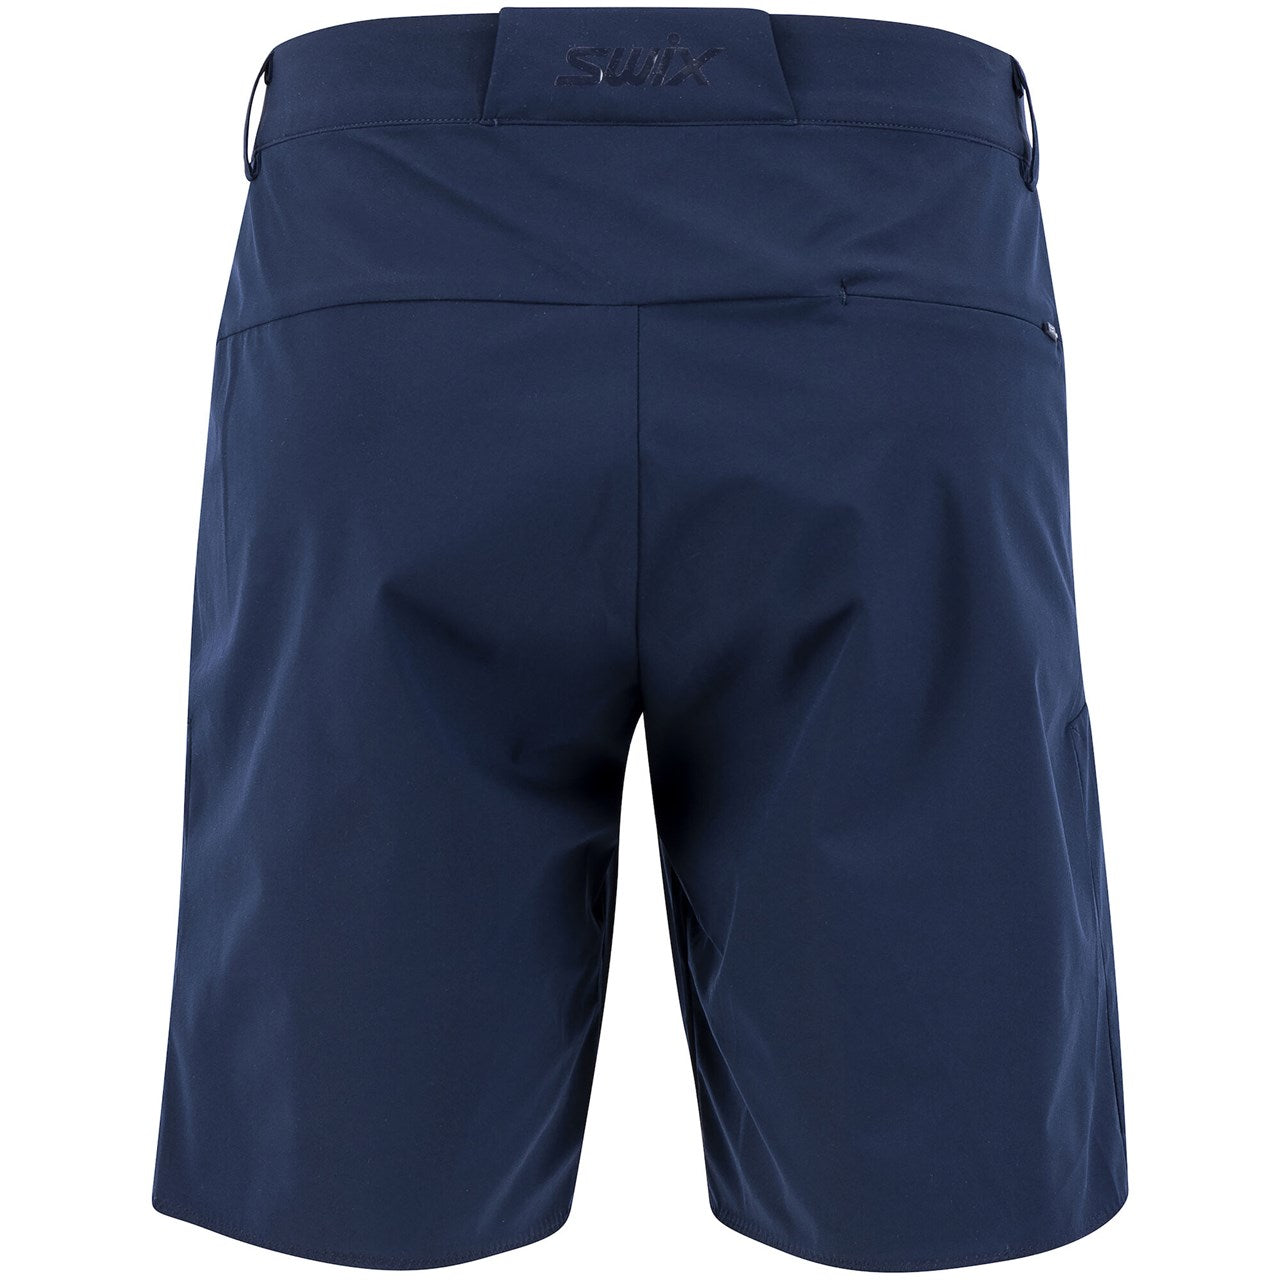 In Motion Performance Shorts